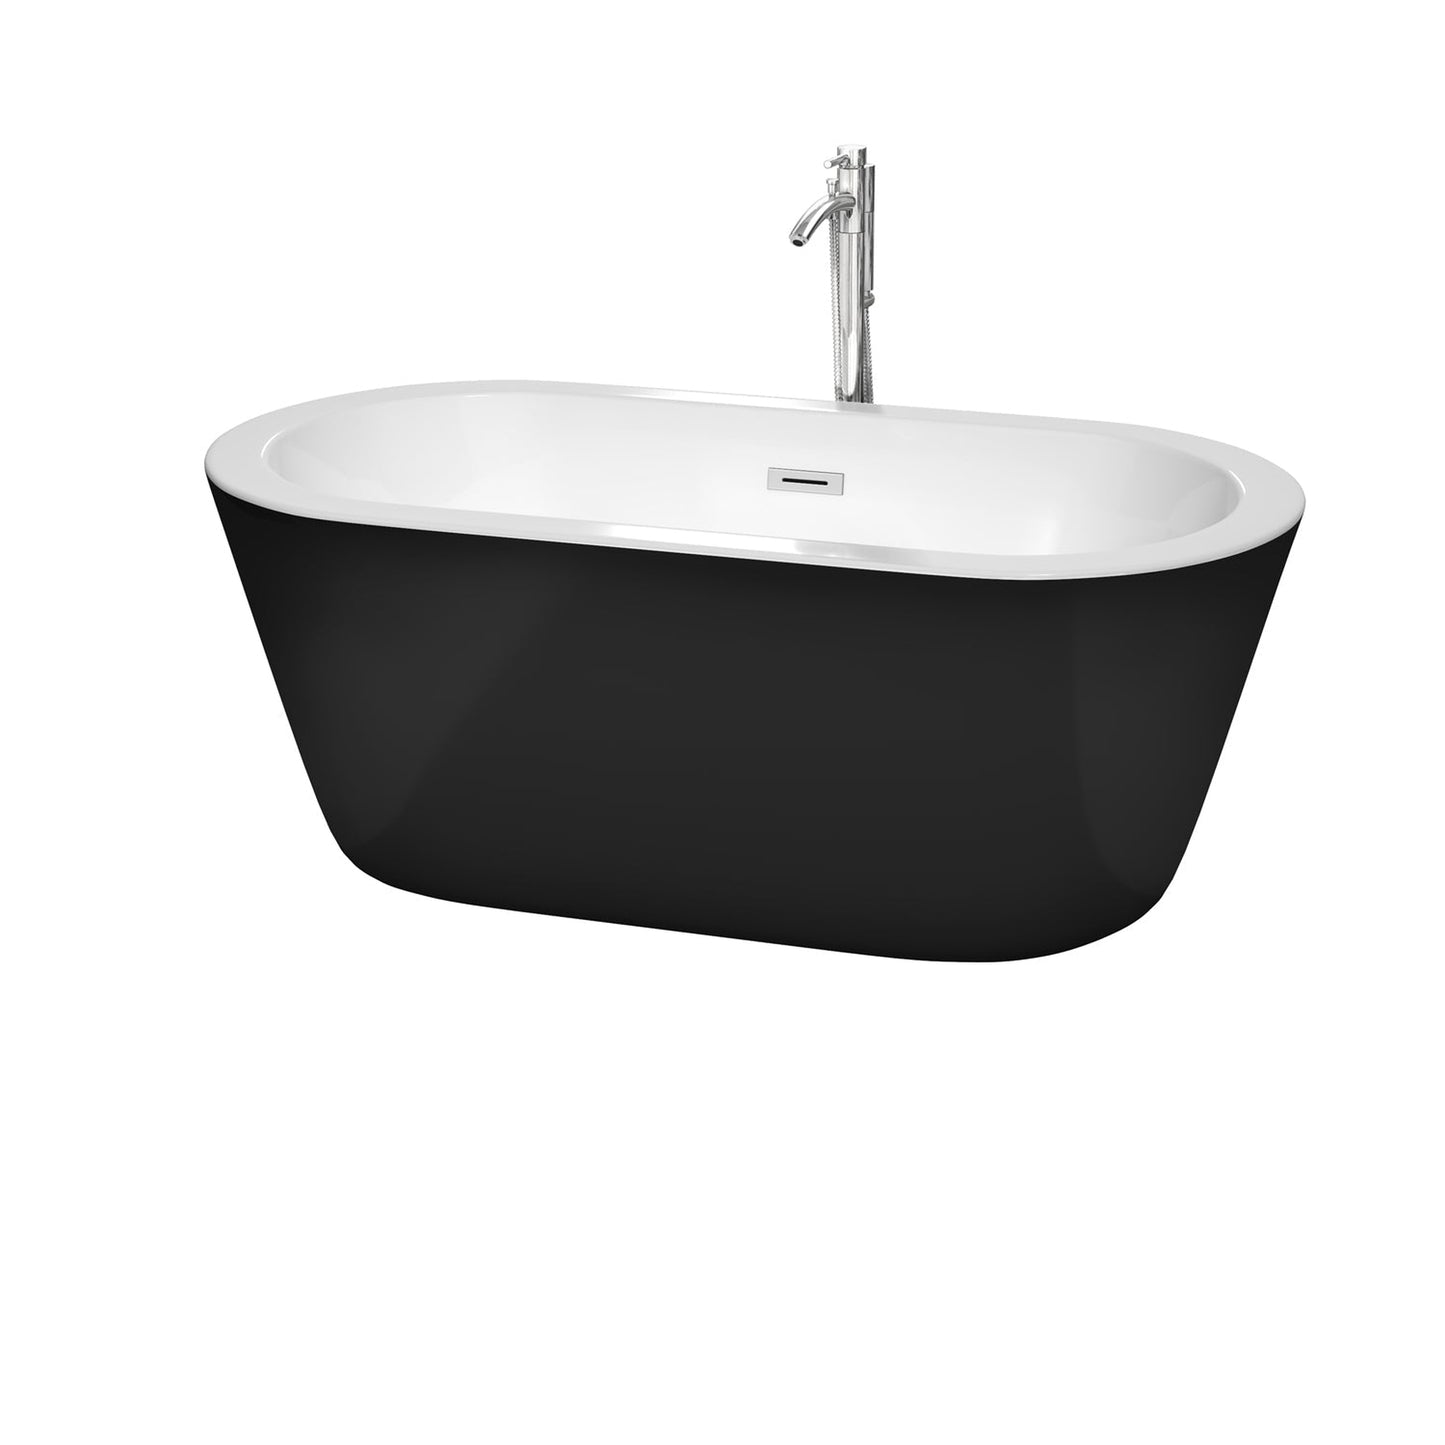 Wyndham Collection Mermaid 60" Freestanding Bathtub in Black With White Interior With Floor Mounted Faucet, Drain and Overflow Trim in Polished Chrome